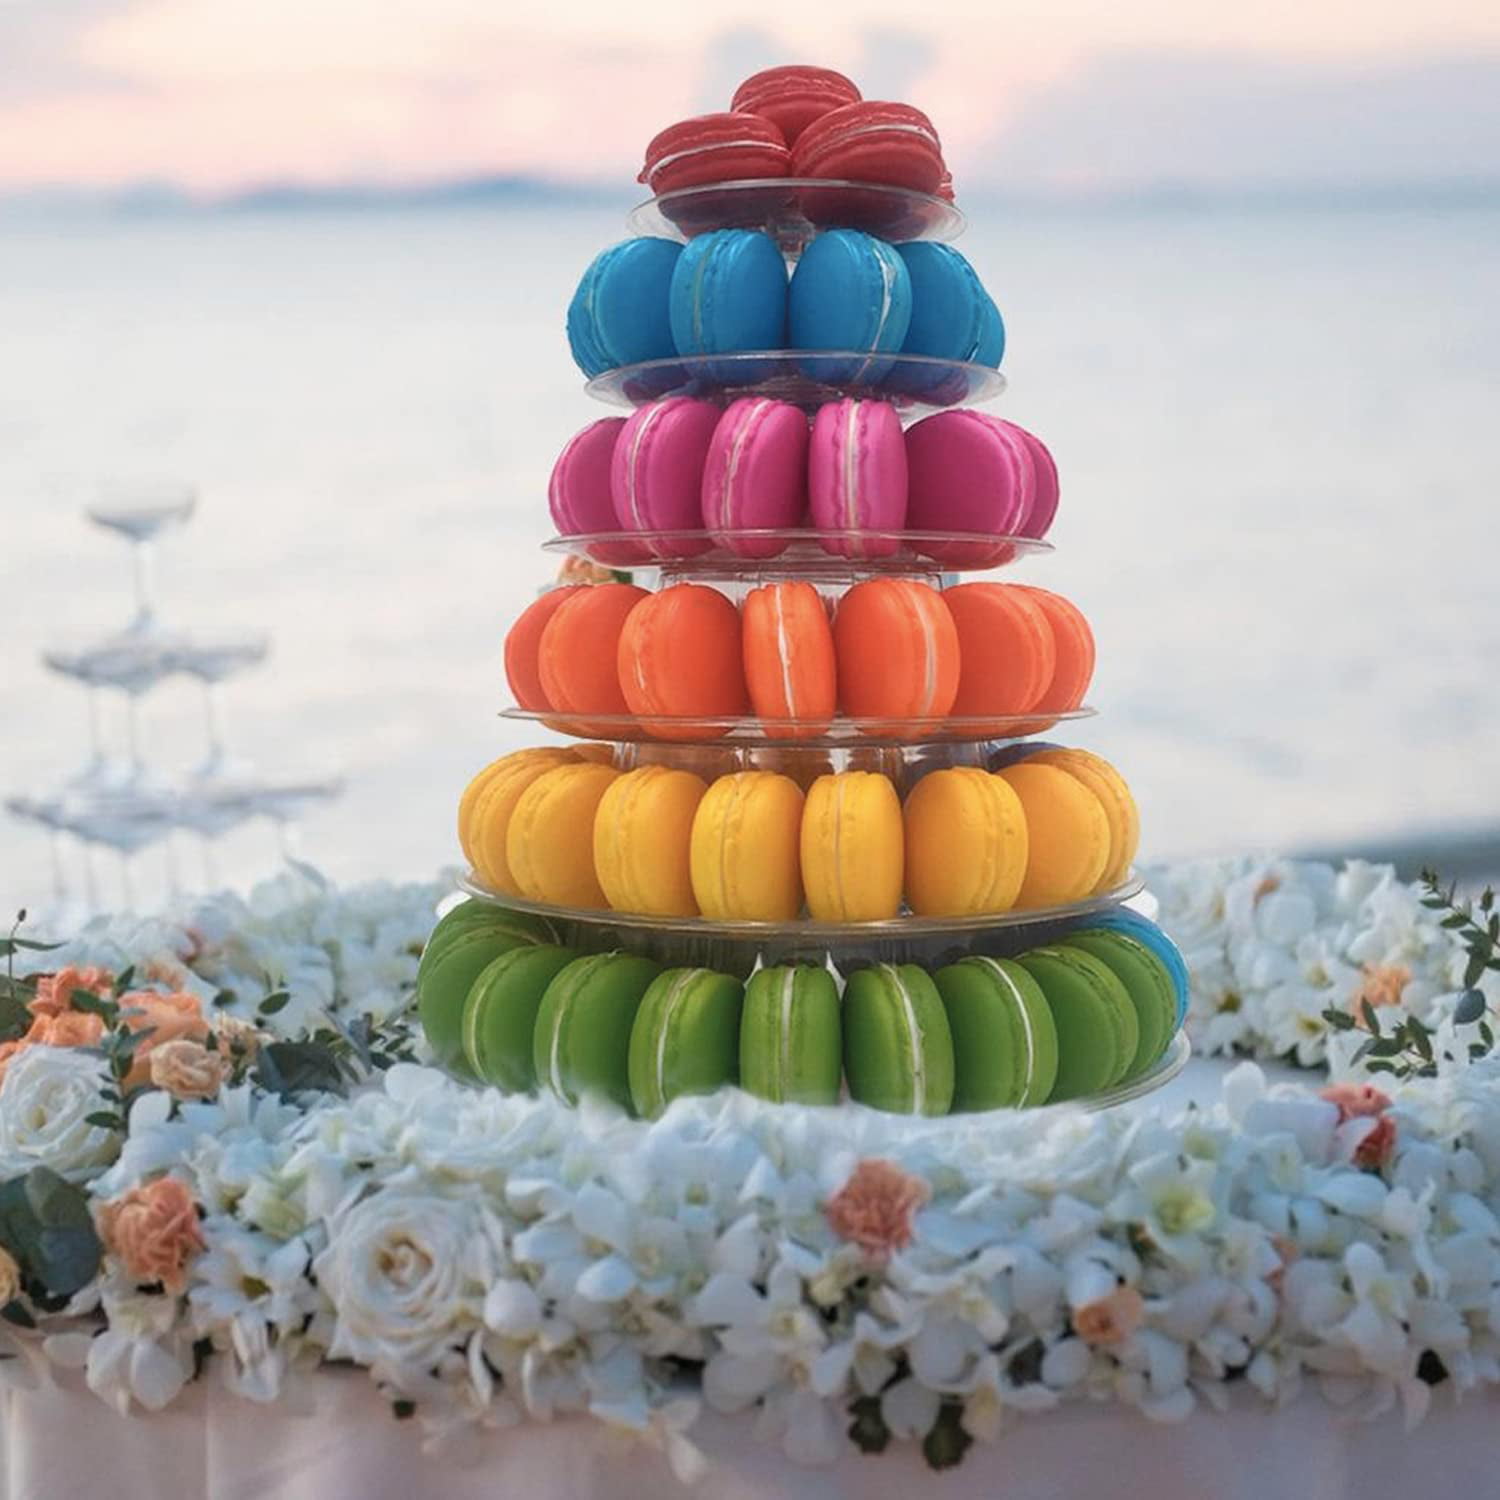 6 Tiers Cupcake Holder Stand Cake Display Rack Adjustable Tiers for Wedding Birthday Party Decor Set 1 Round Macaron Tower Stand 